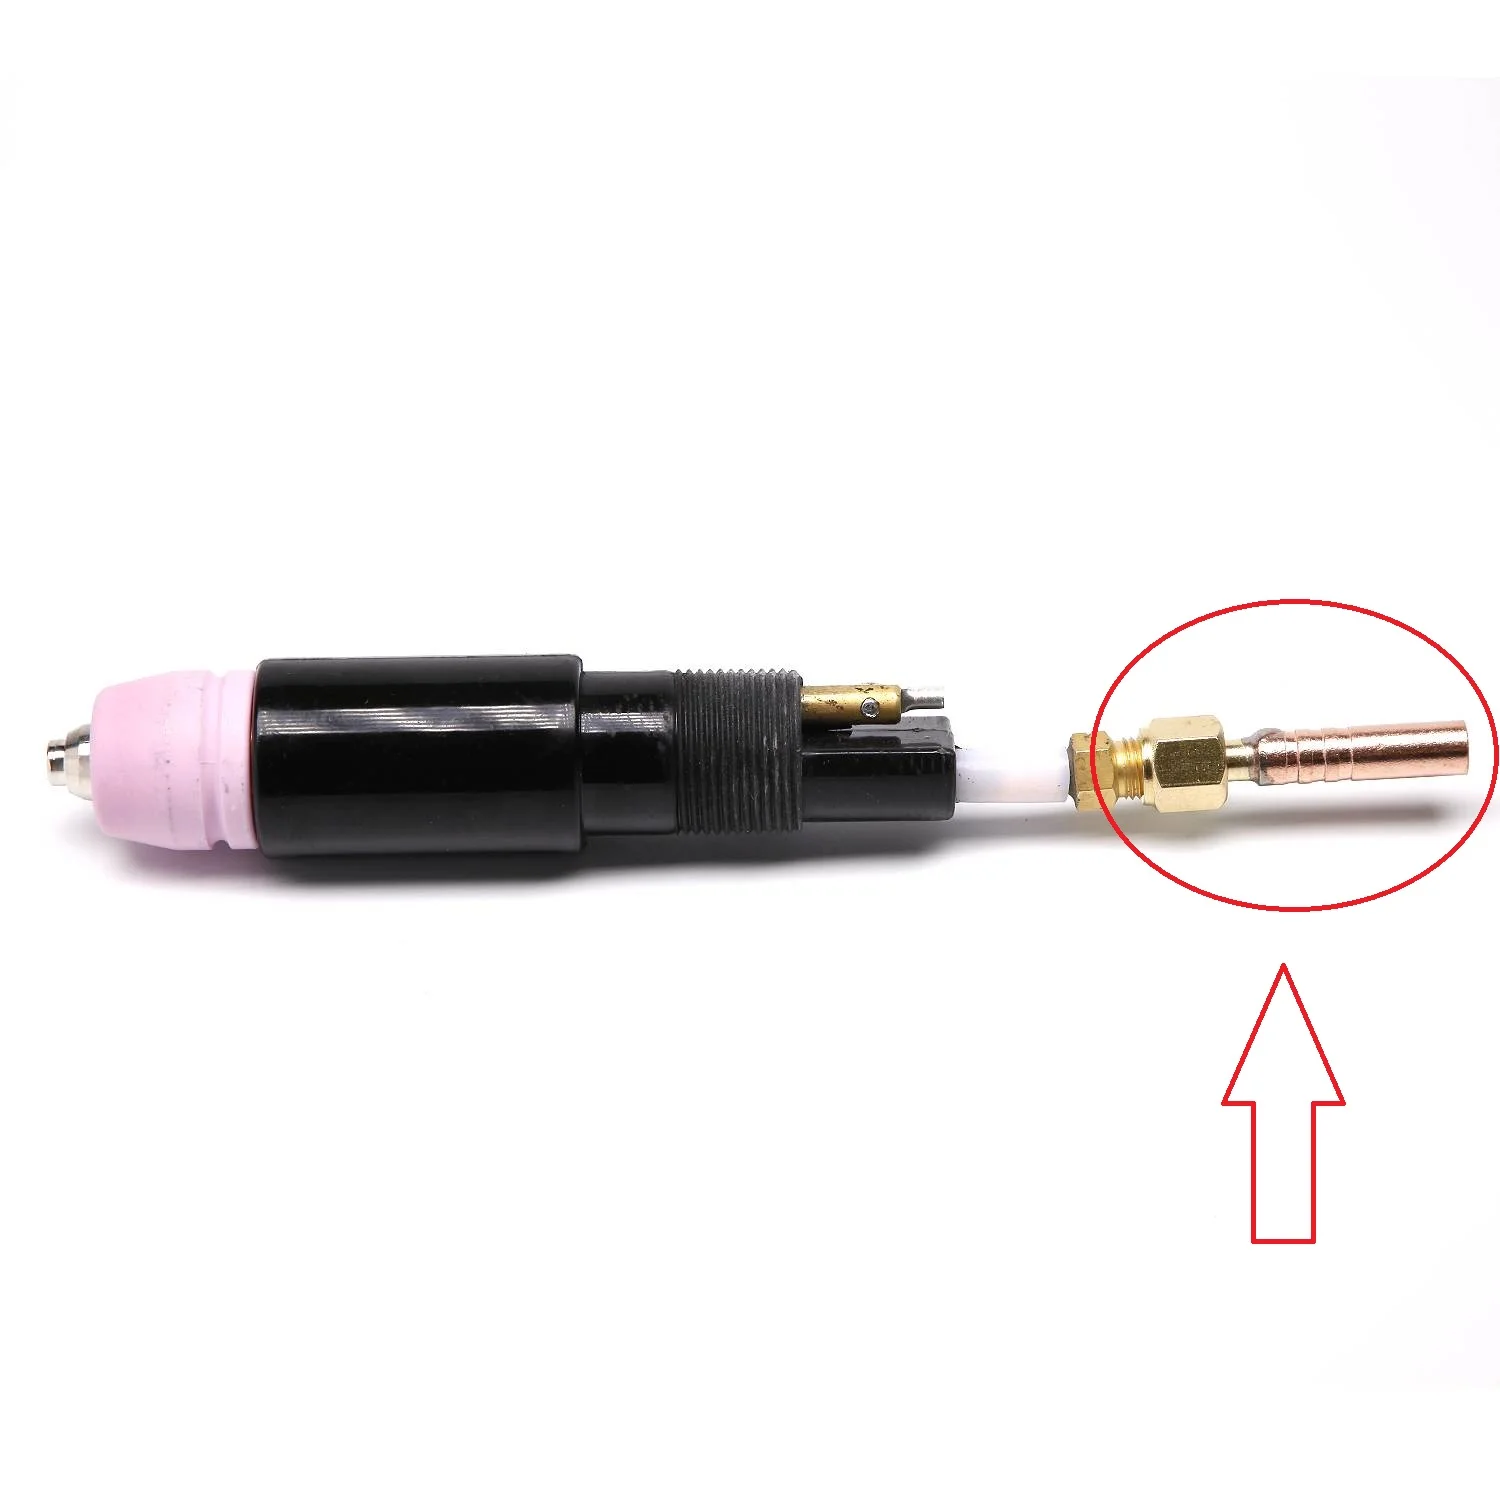 AG-60 AG60 Plasma Torch Repair Power Cable Connector Nut M16x1.5mm M16 Male Female Cutter Part enlarge